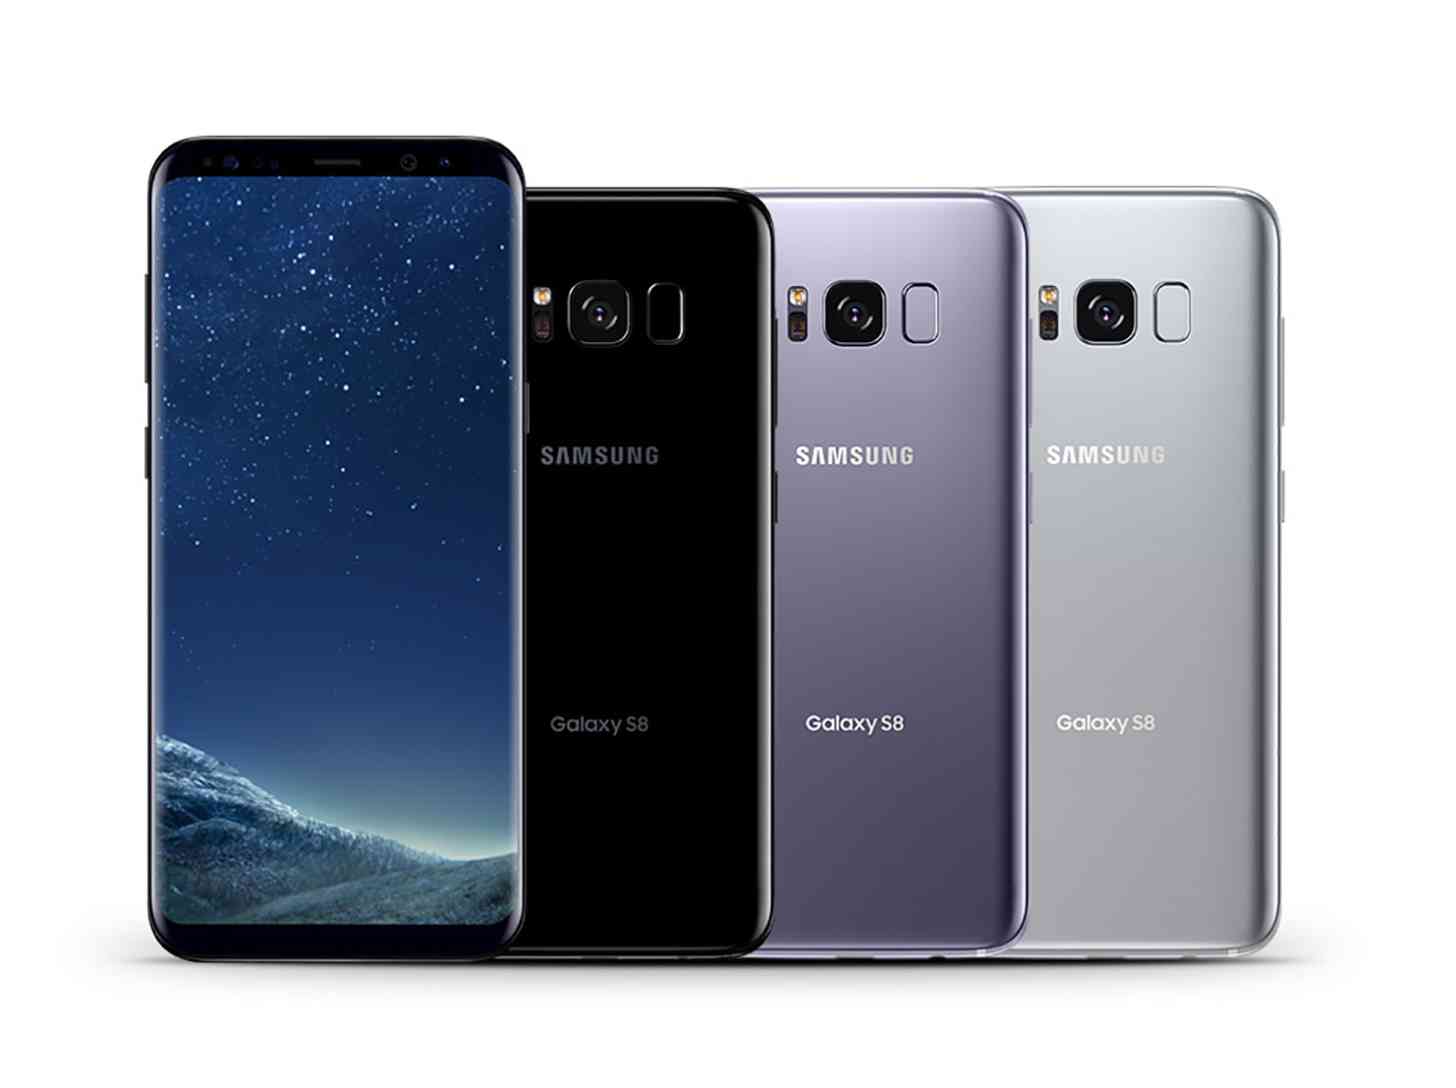 Samsung Galaxy S8 colors official